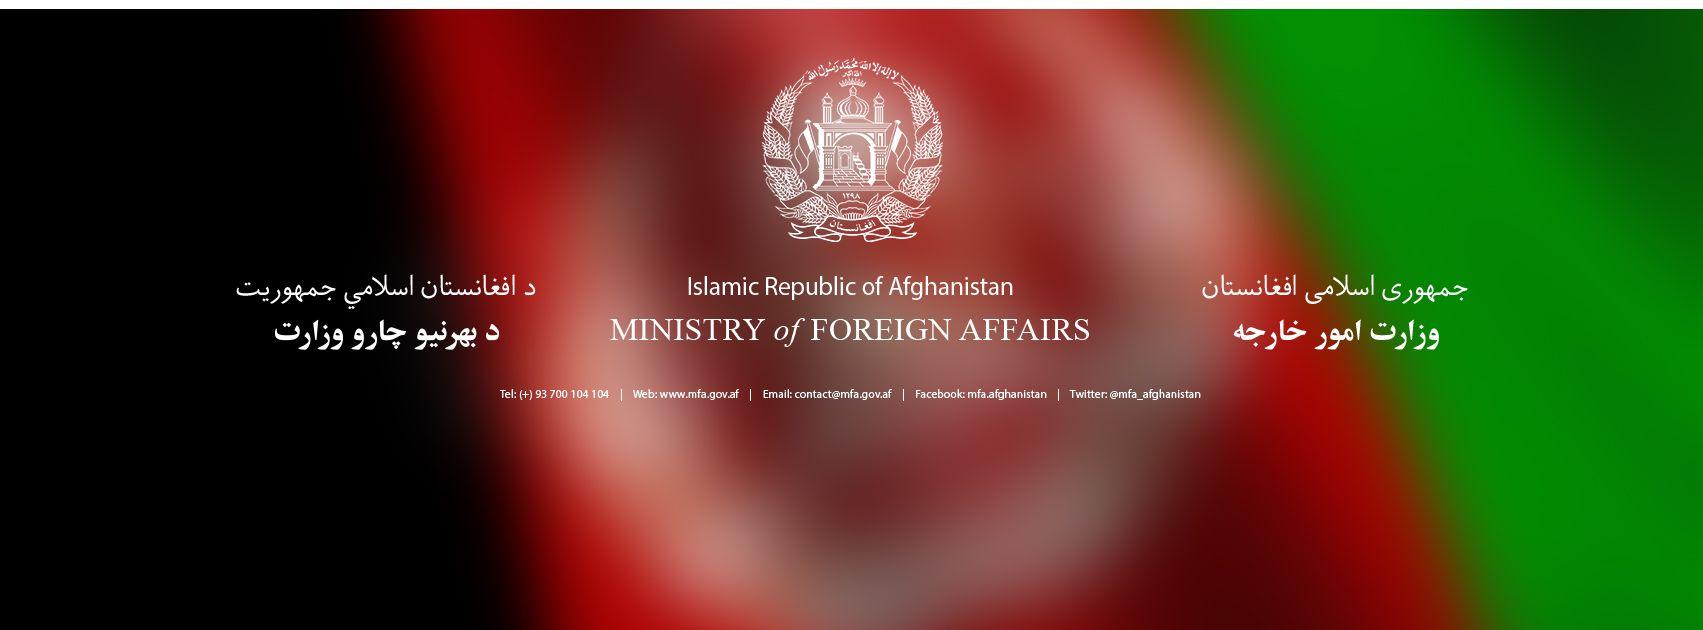 Red Foreign Language Logo - MoFA Staff Foreign Language Skills to Be Assessed | Independent ...